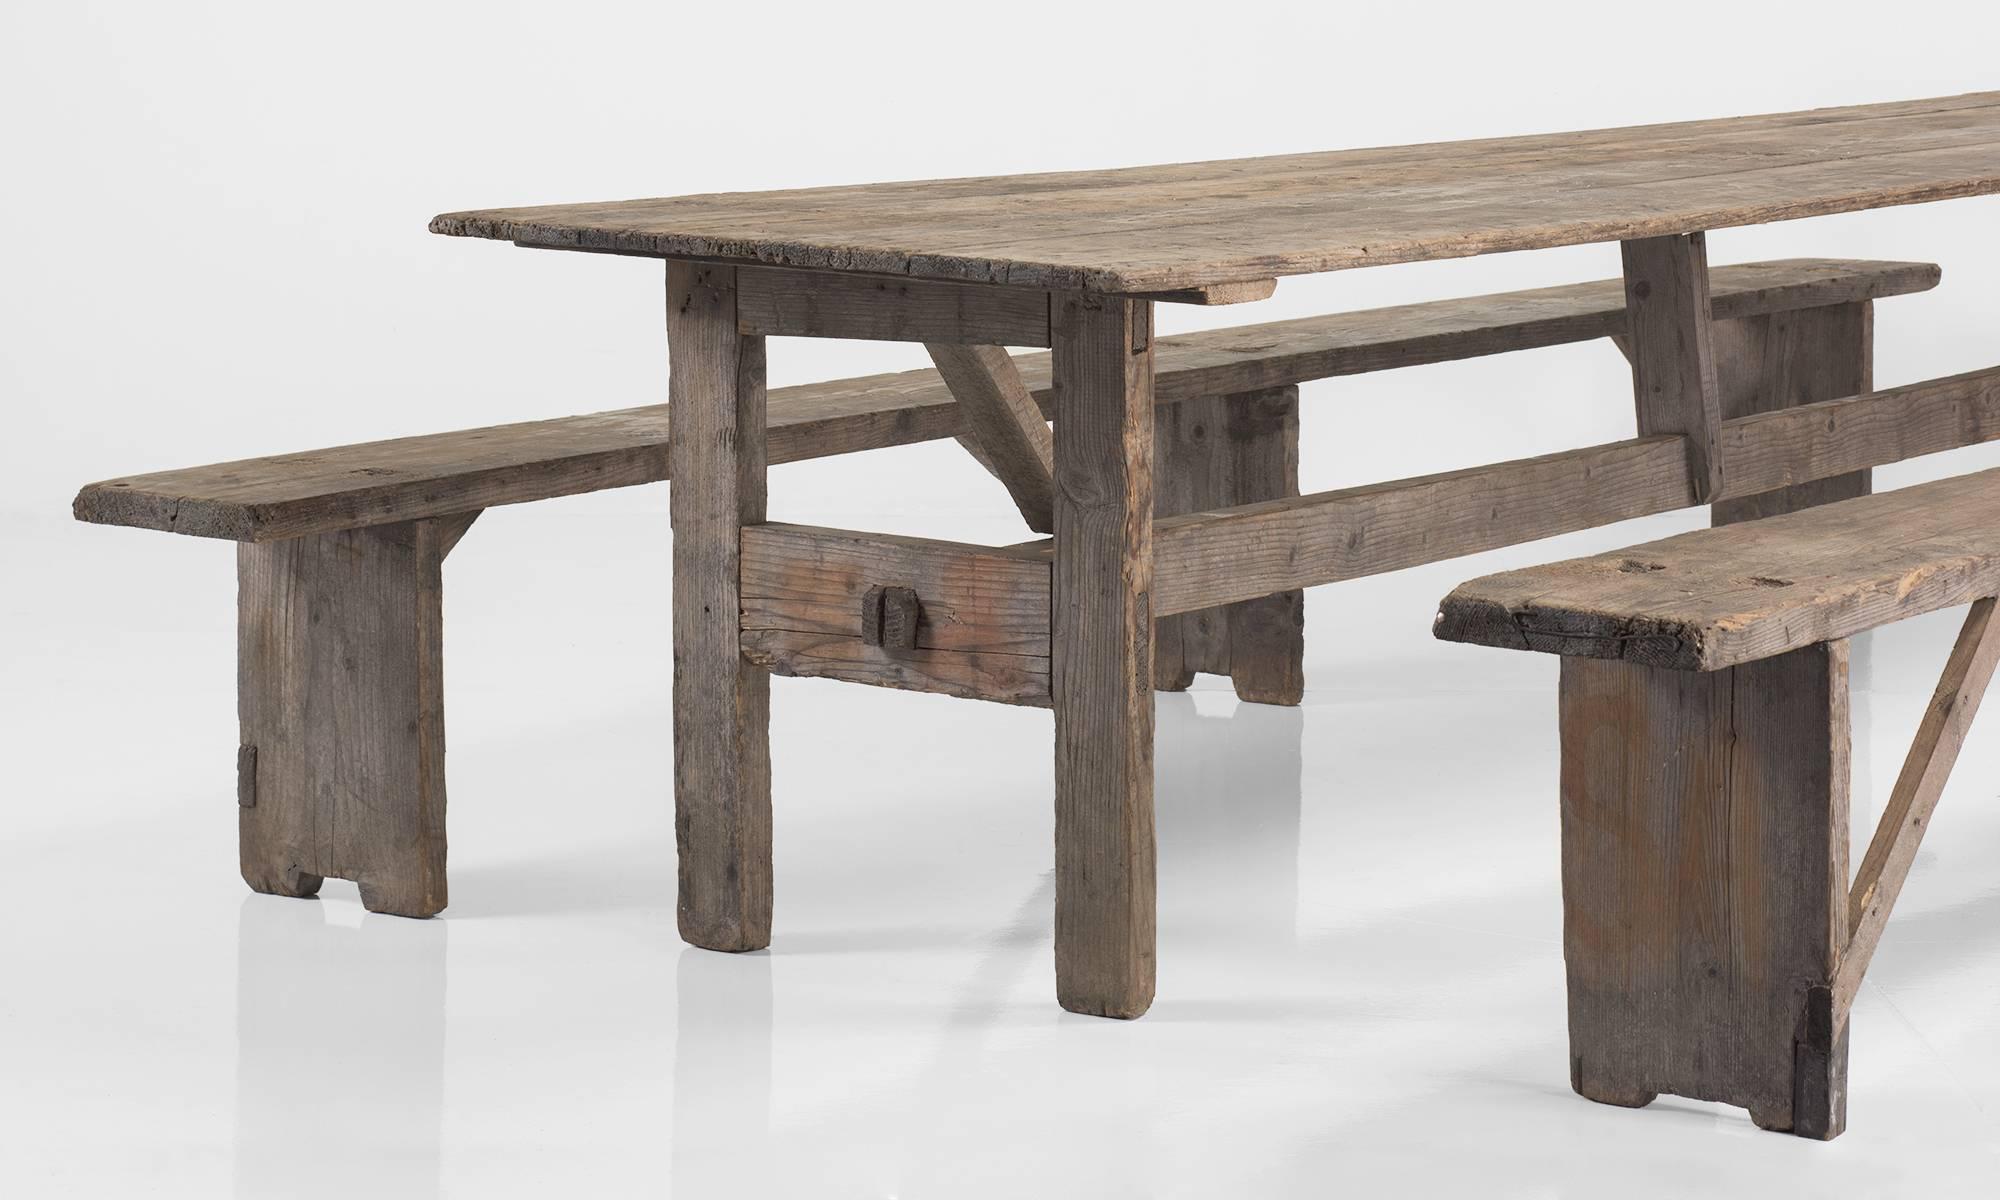 Primitive Massive Pine Dining Table with Benches, circa 1900